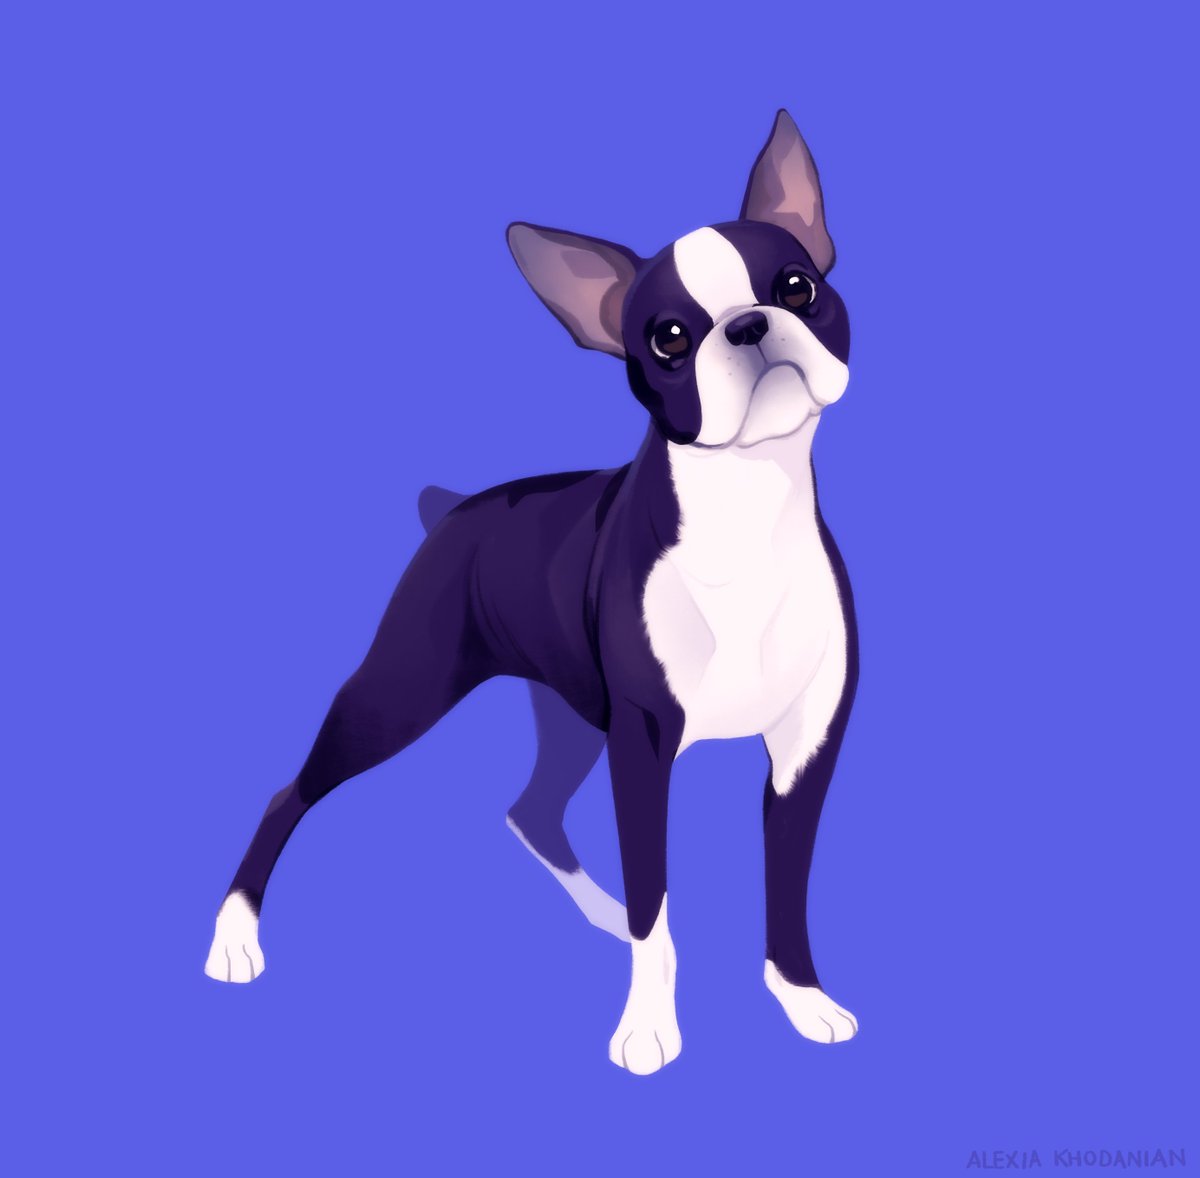  #doggust day 13: Boston Terrier! What a special little fella